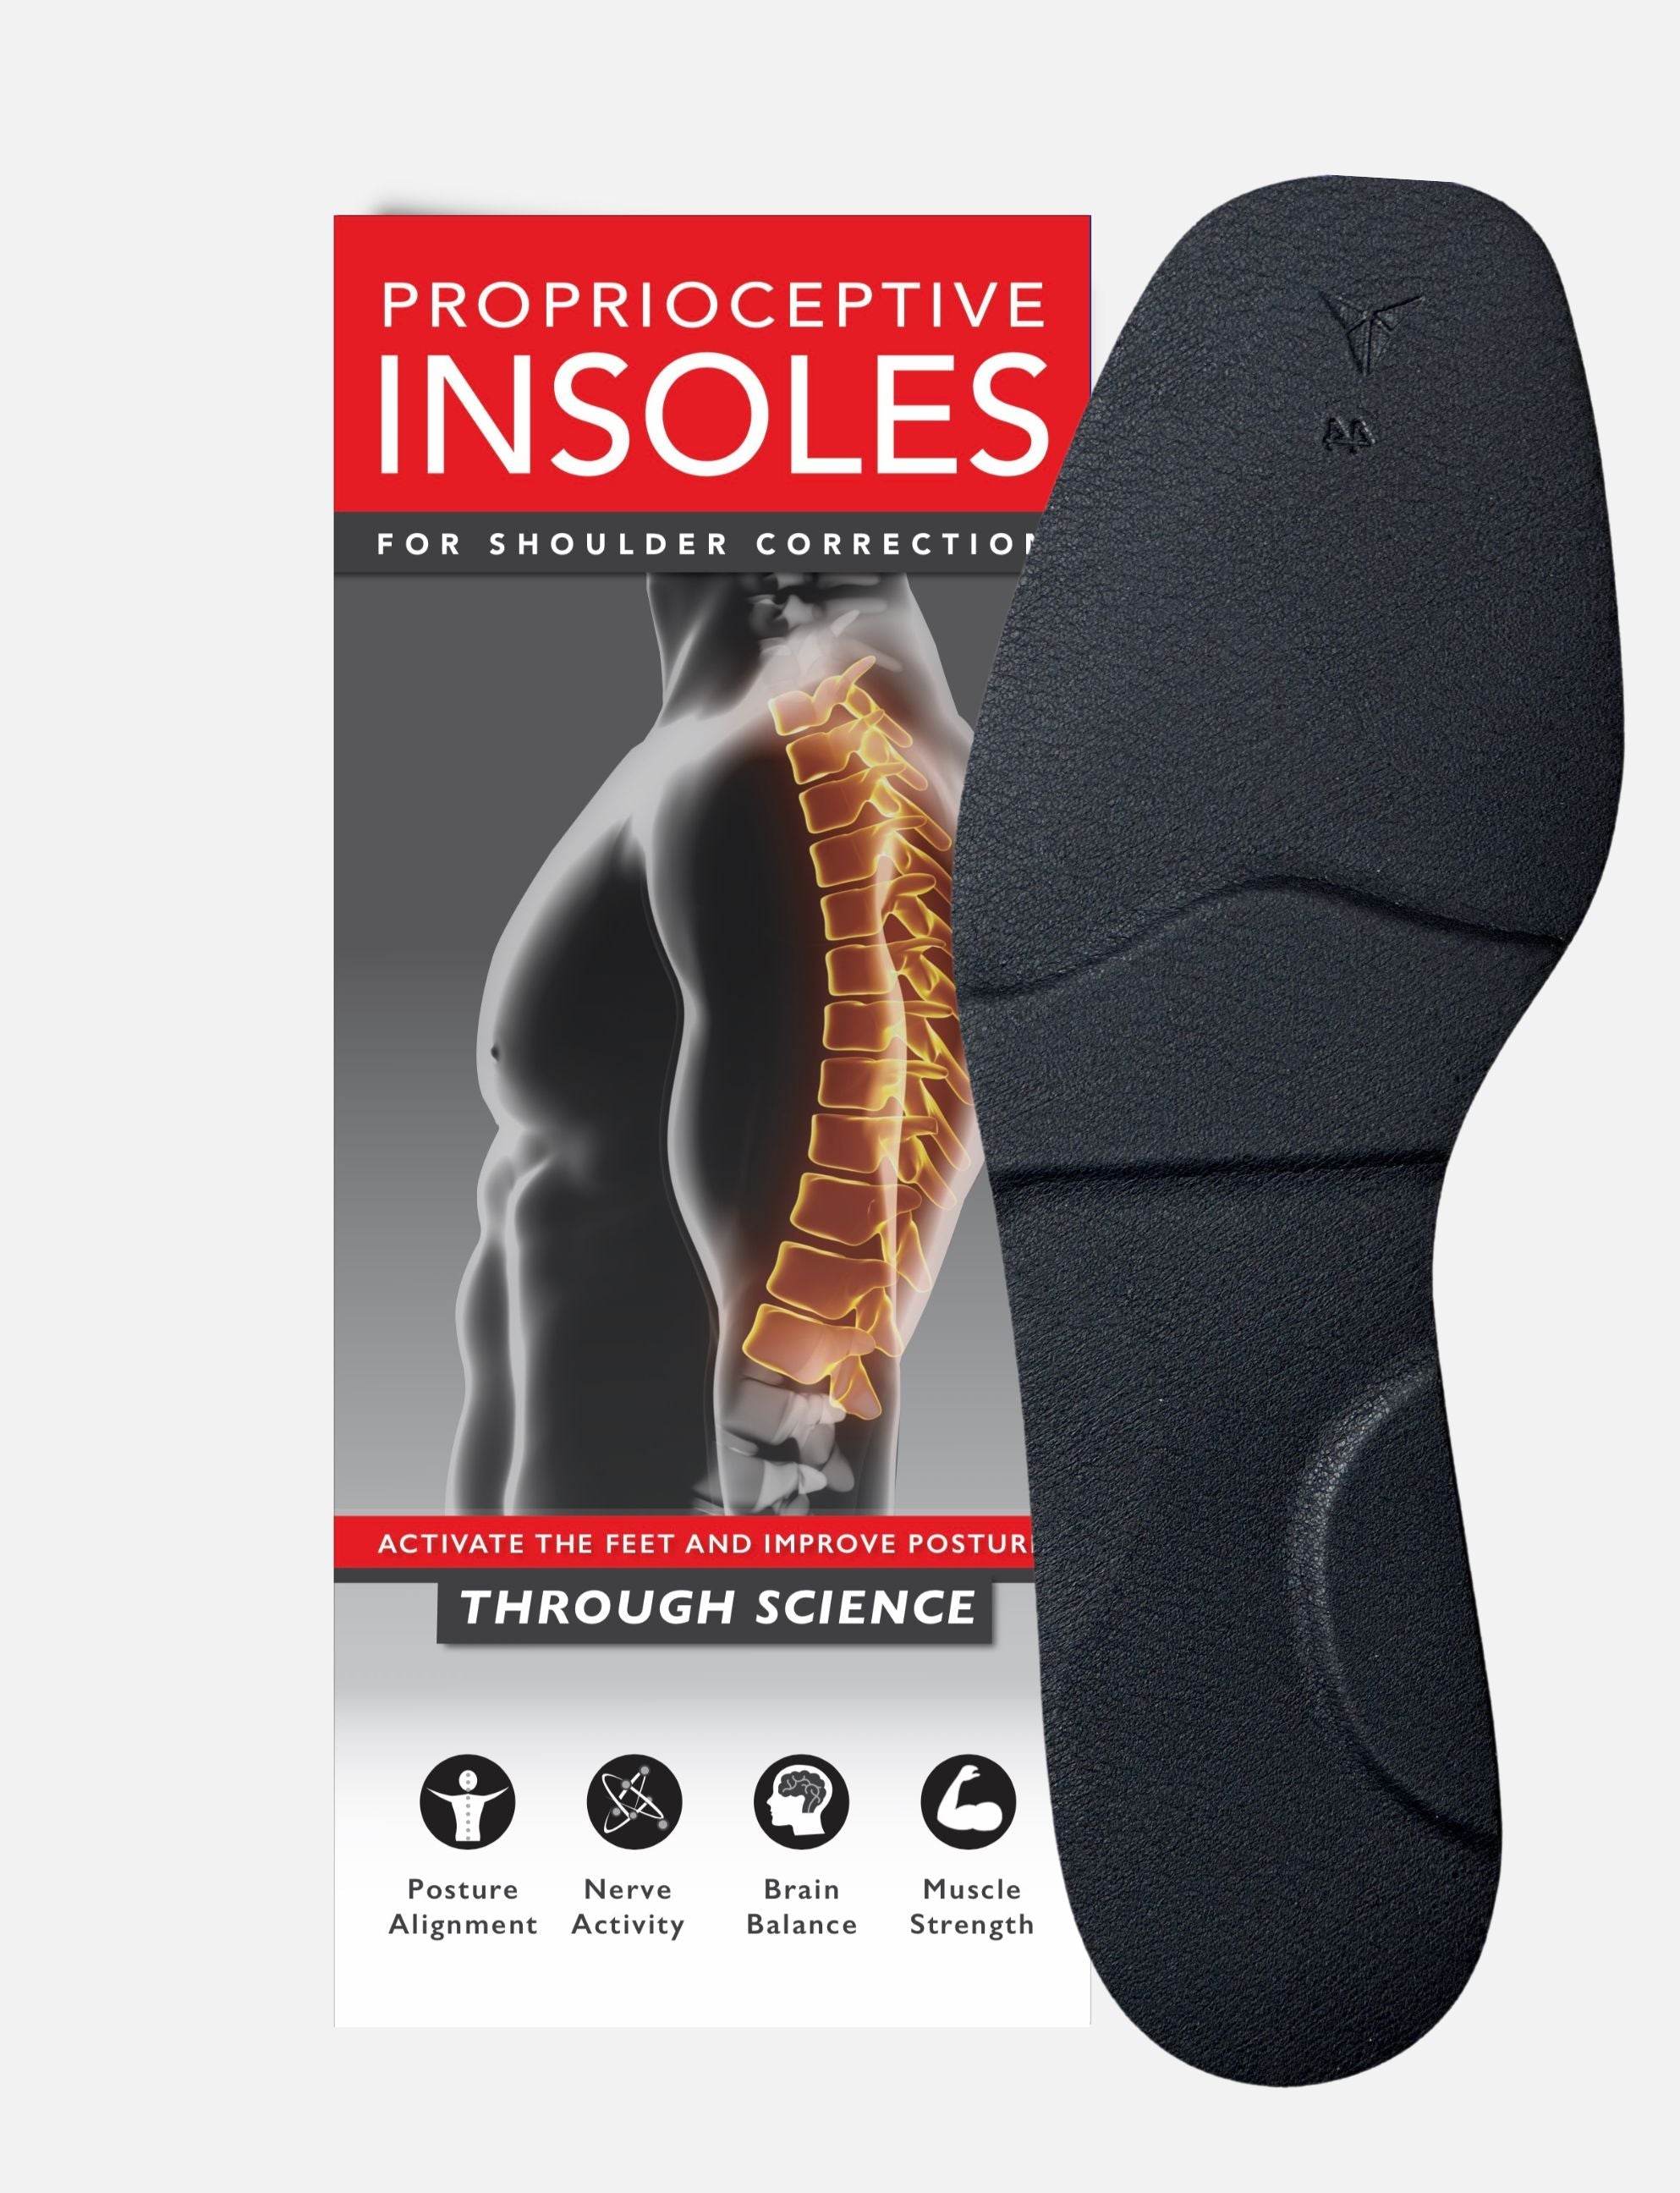 Posturepro Insoles to correct rounded shoulders and forward head posture.